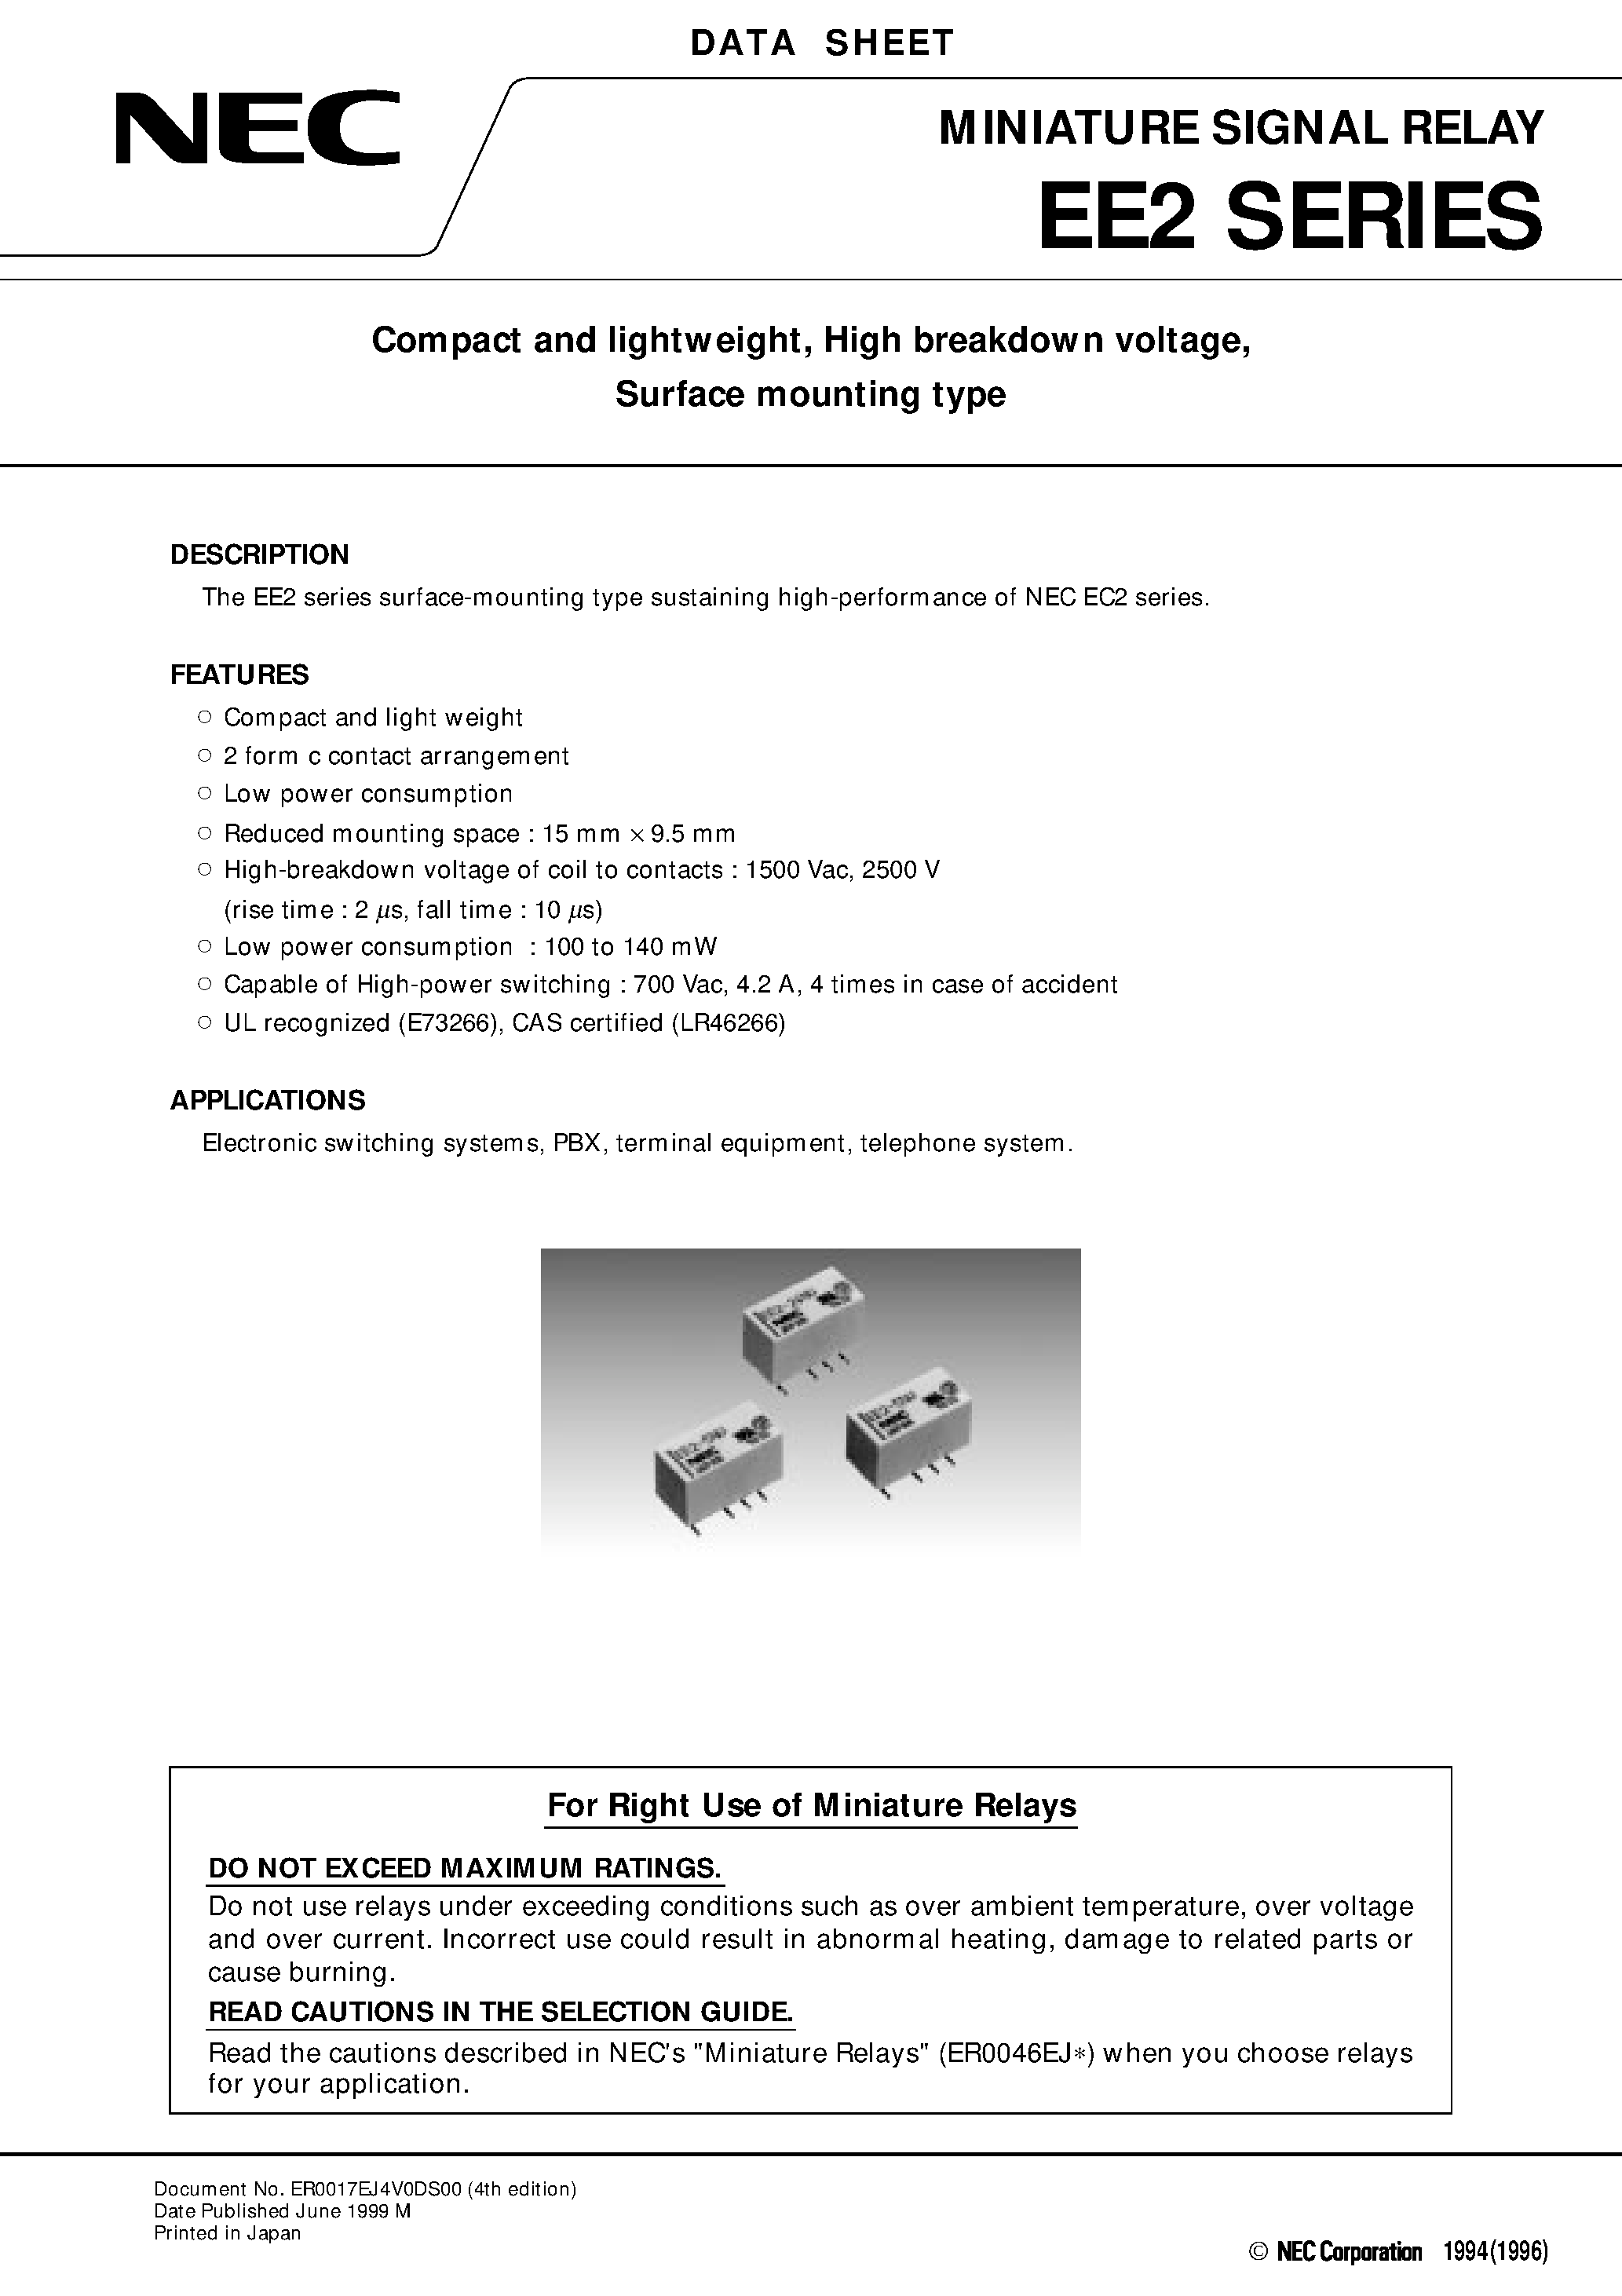 Datasheet EE2-9-L - Compact and lightweight/ High breakdown voltage/ Surface mounting type page 1